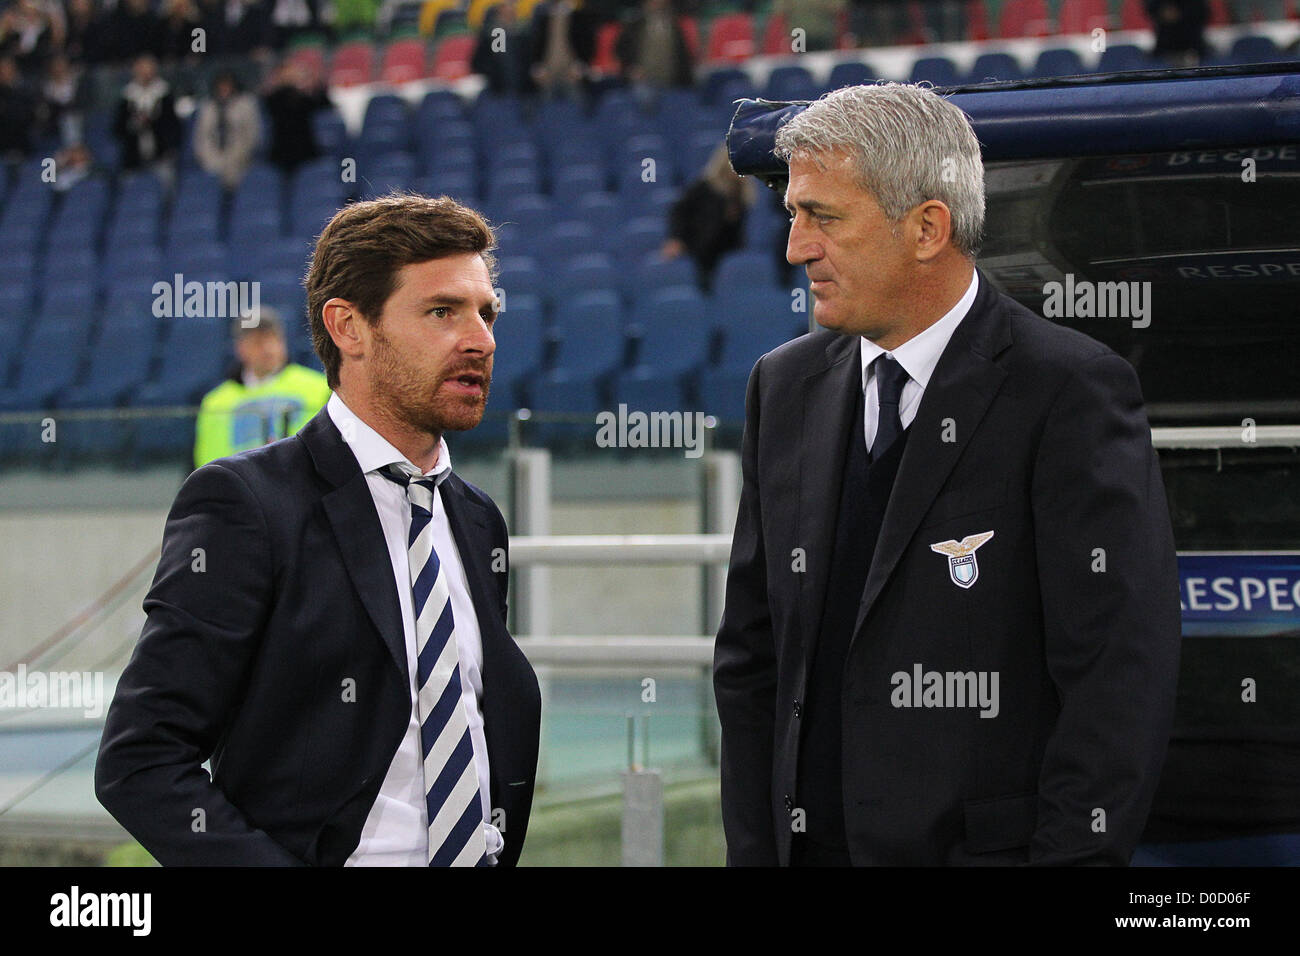 22.11.2012. Rome, Italy. VLADIMIR PETKOVIC and Andre Villas-Boasin action during the Europa League game between Lazio and Tottenham Hotspur from The Olympic Stadium. Stock Photo